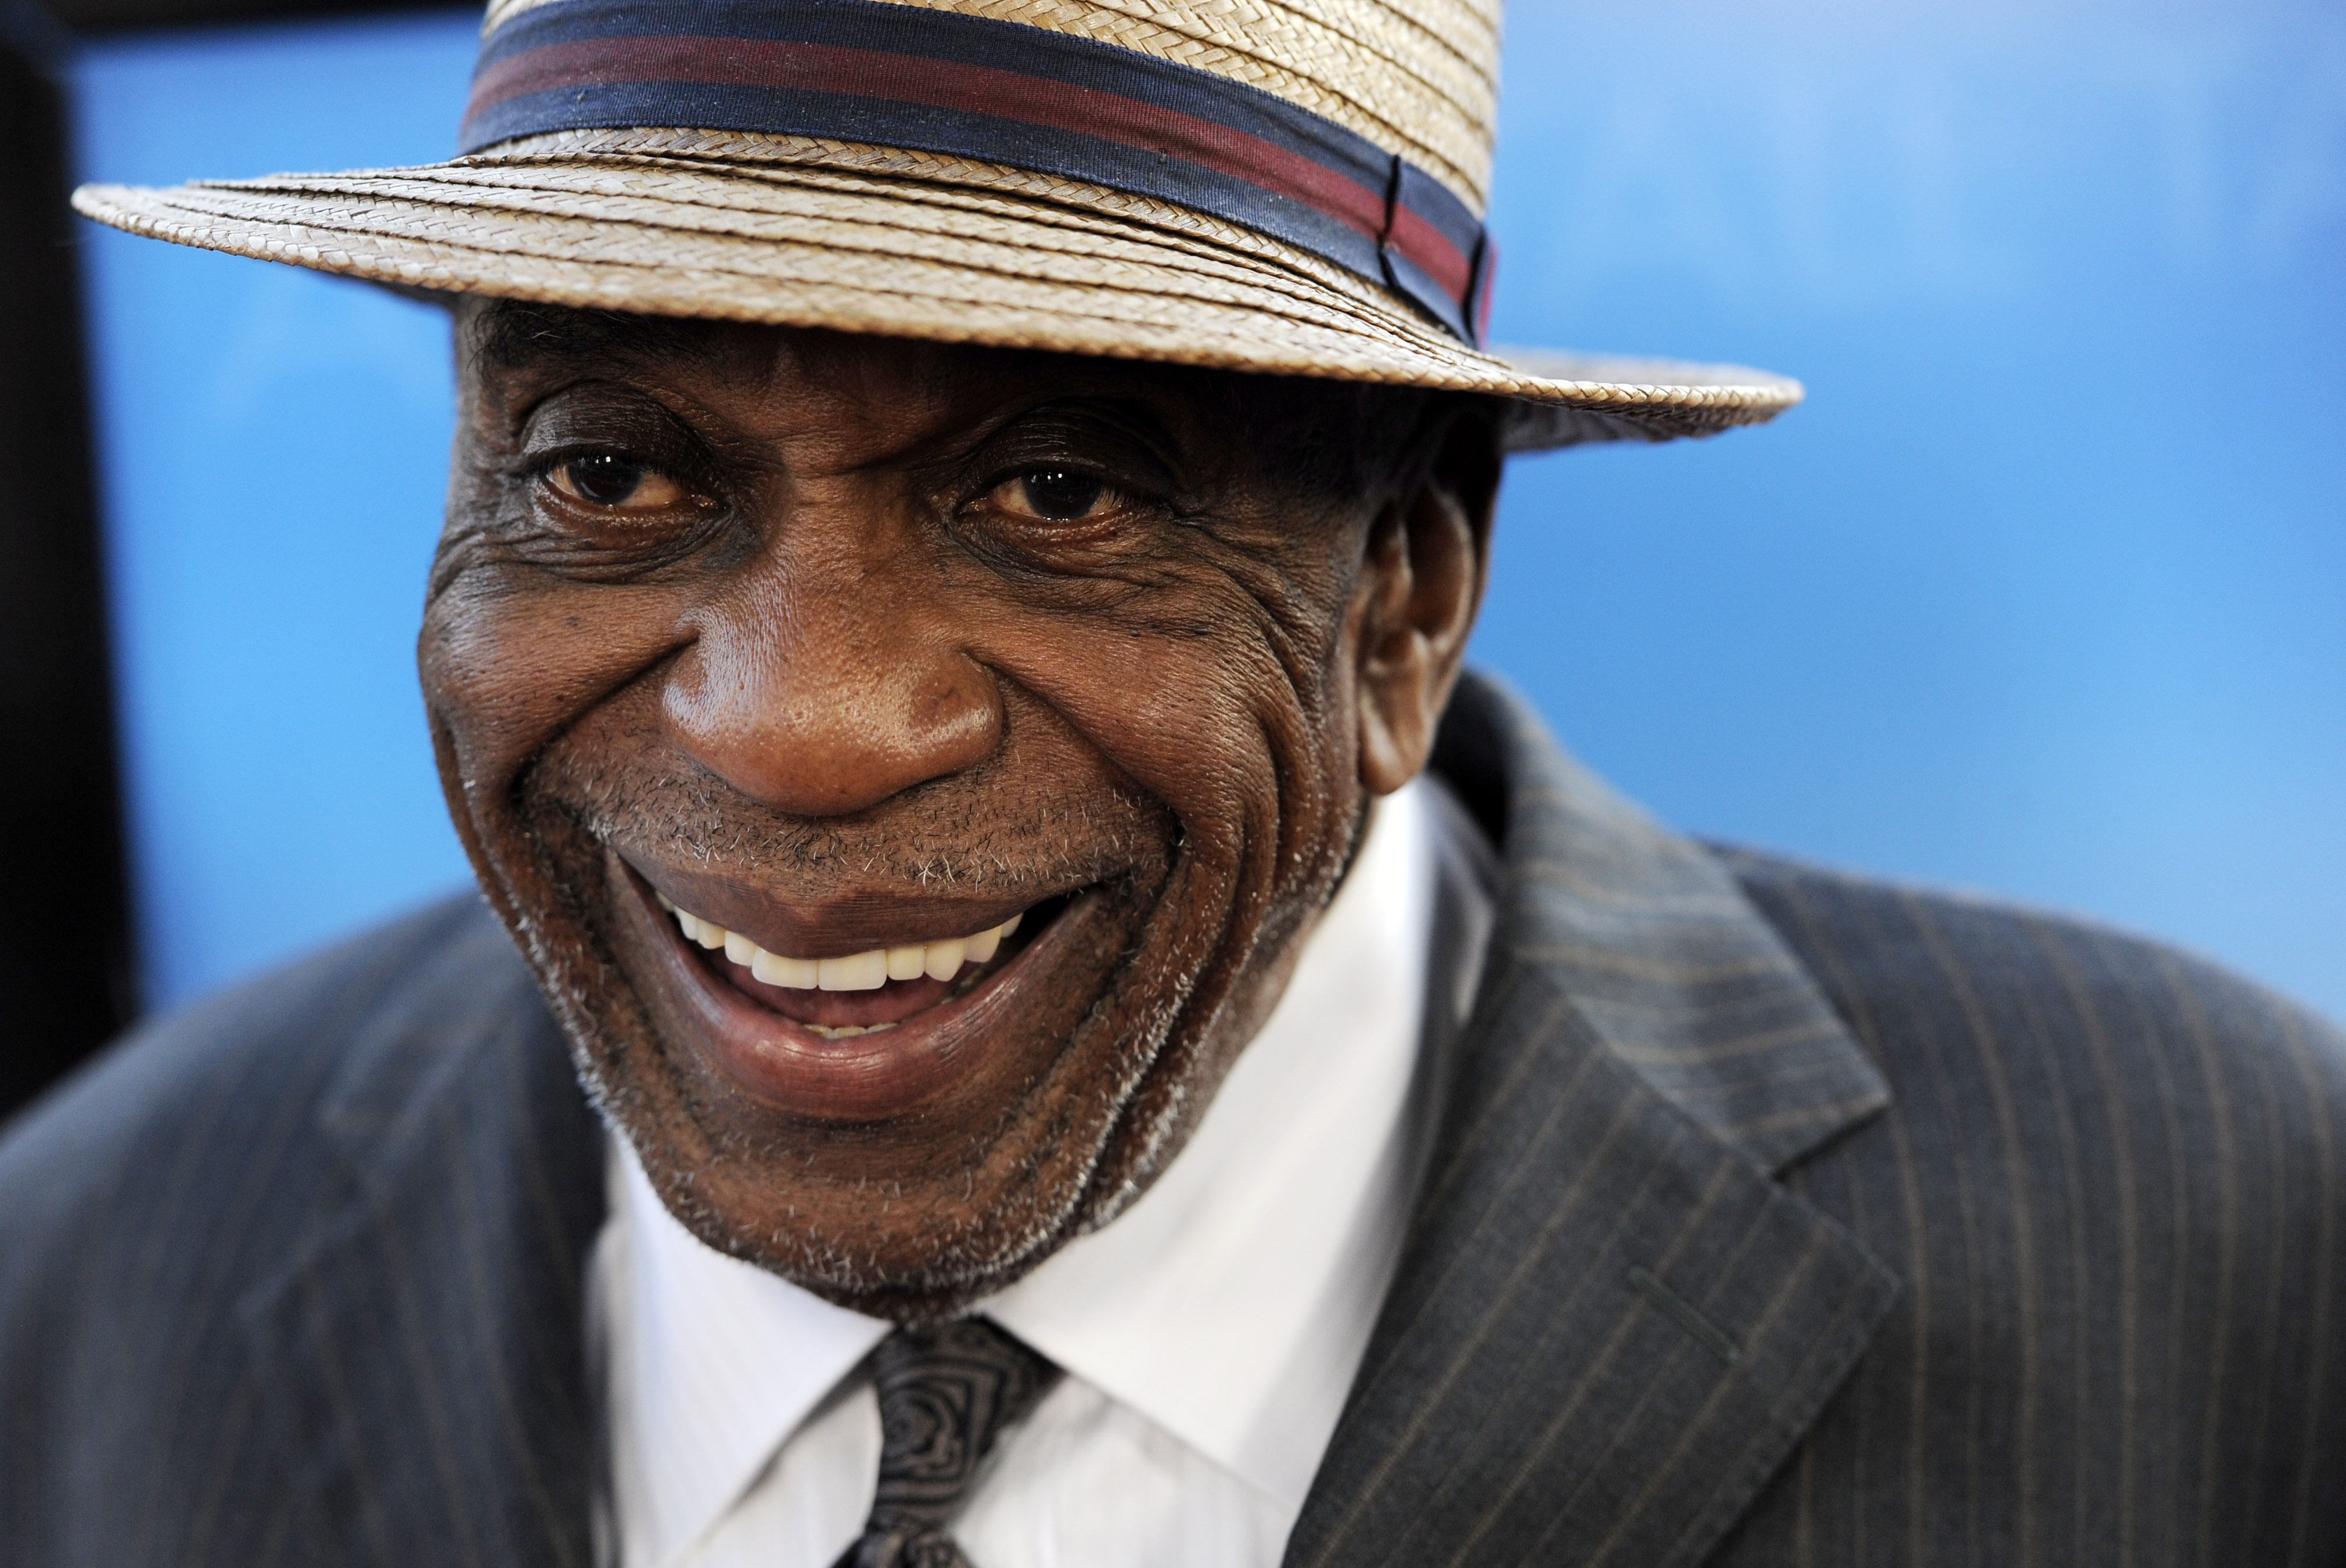 It was revealed on June 26 that Bill Cobbs died peacefully in his sleep